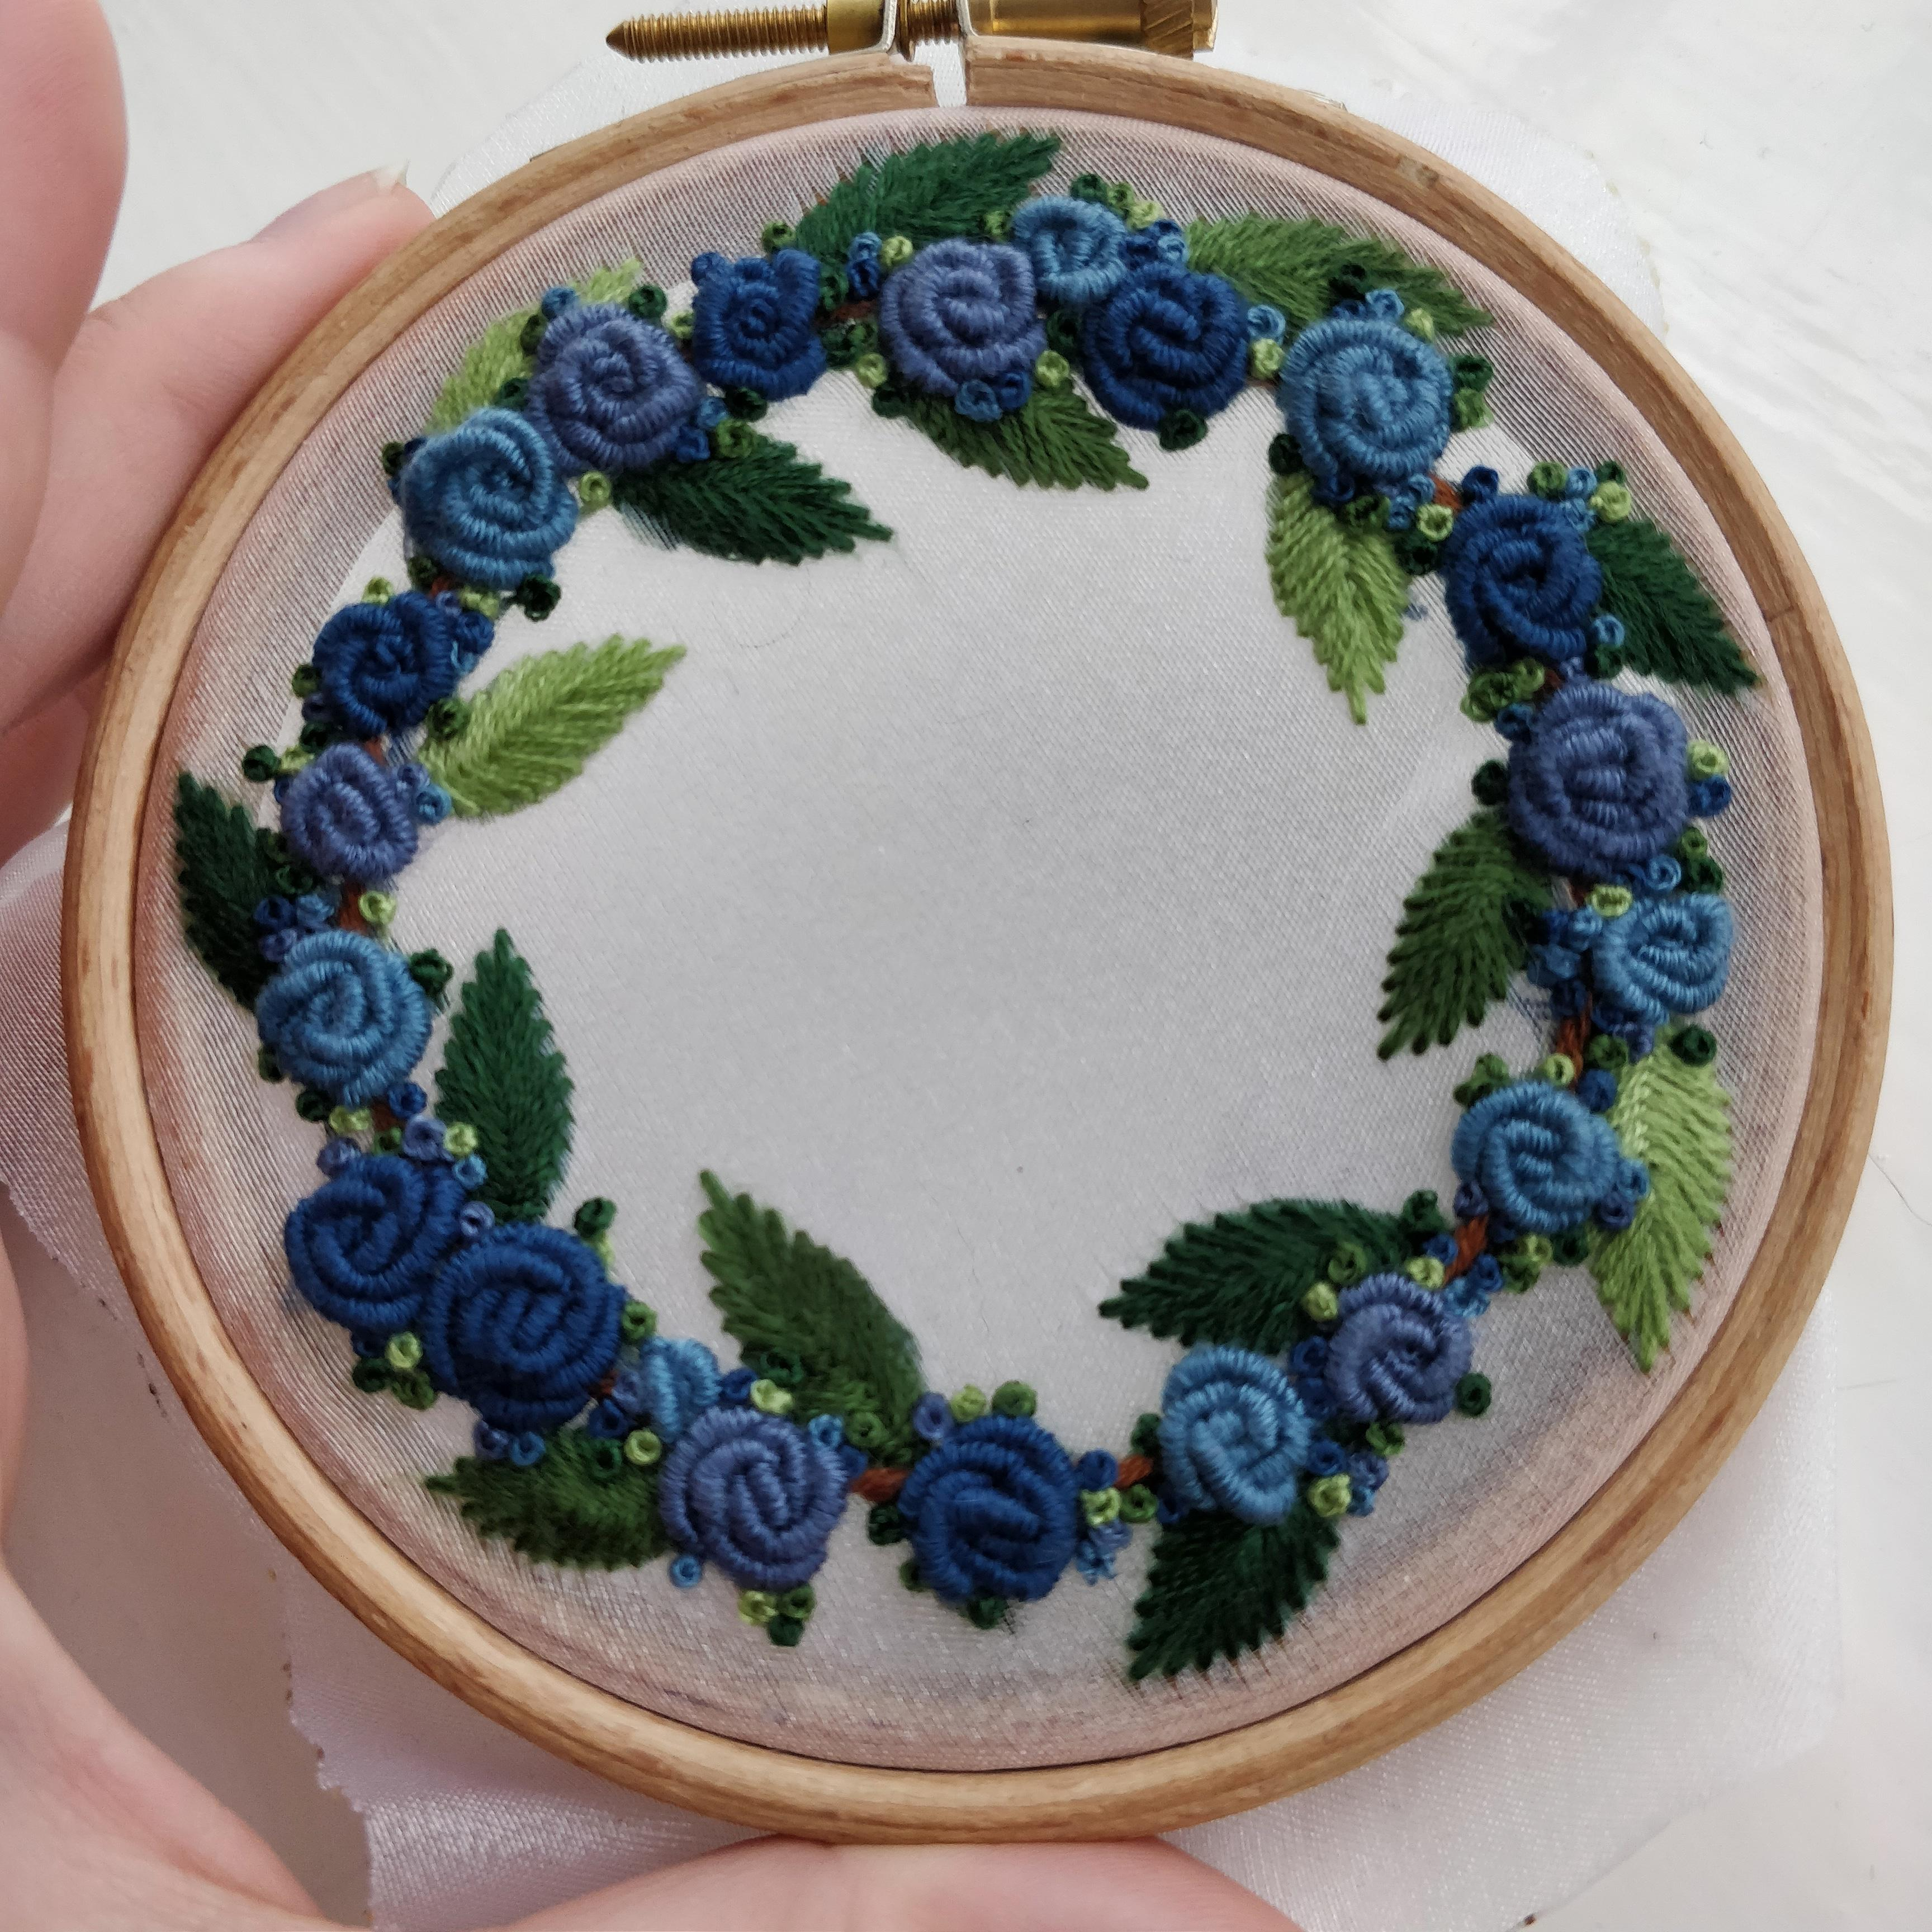 French Knot Embroidery Patterns A 4 Inch Embroidered Organza Hoop Featuring Bullion Knots French